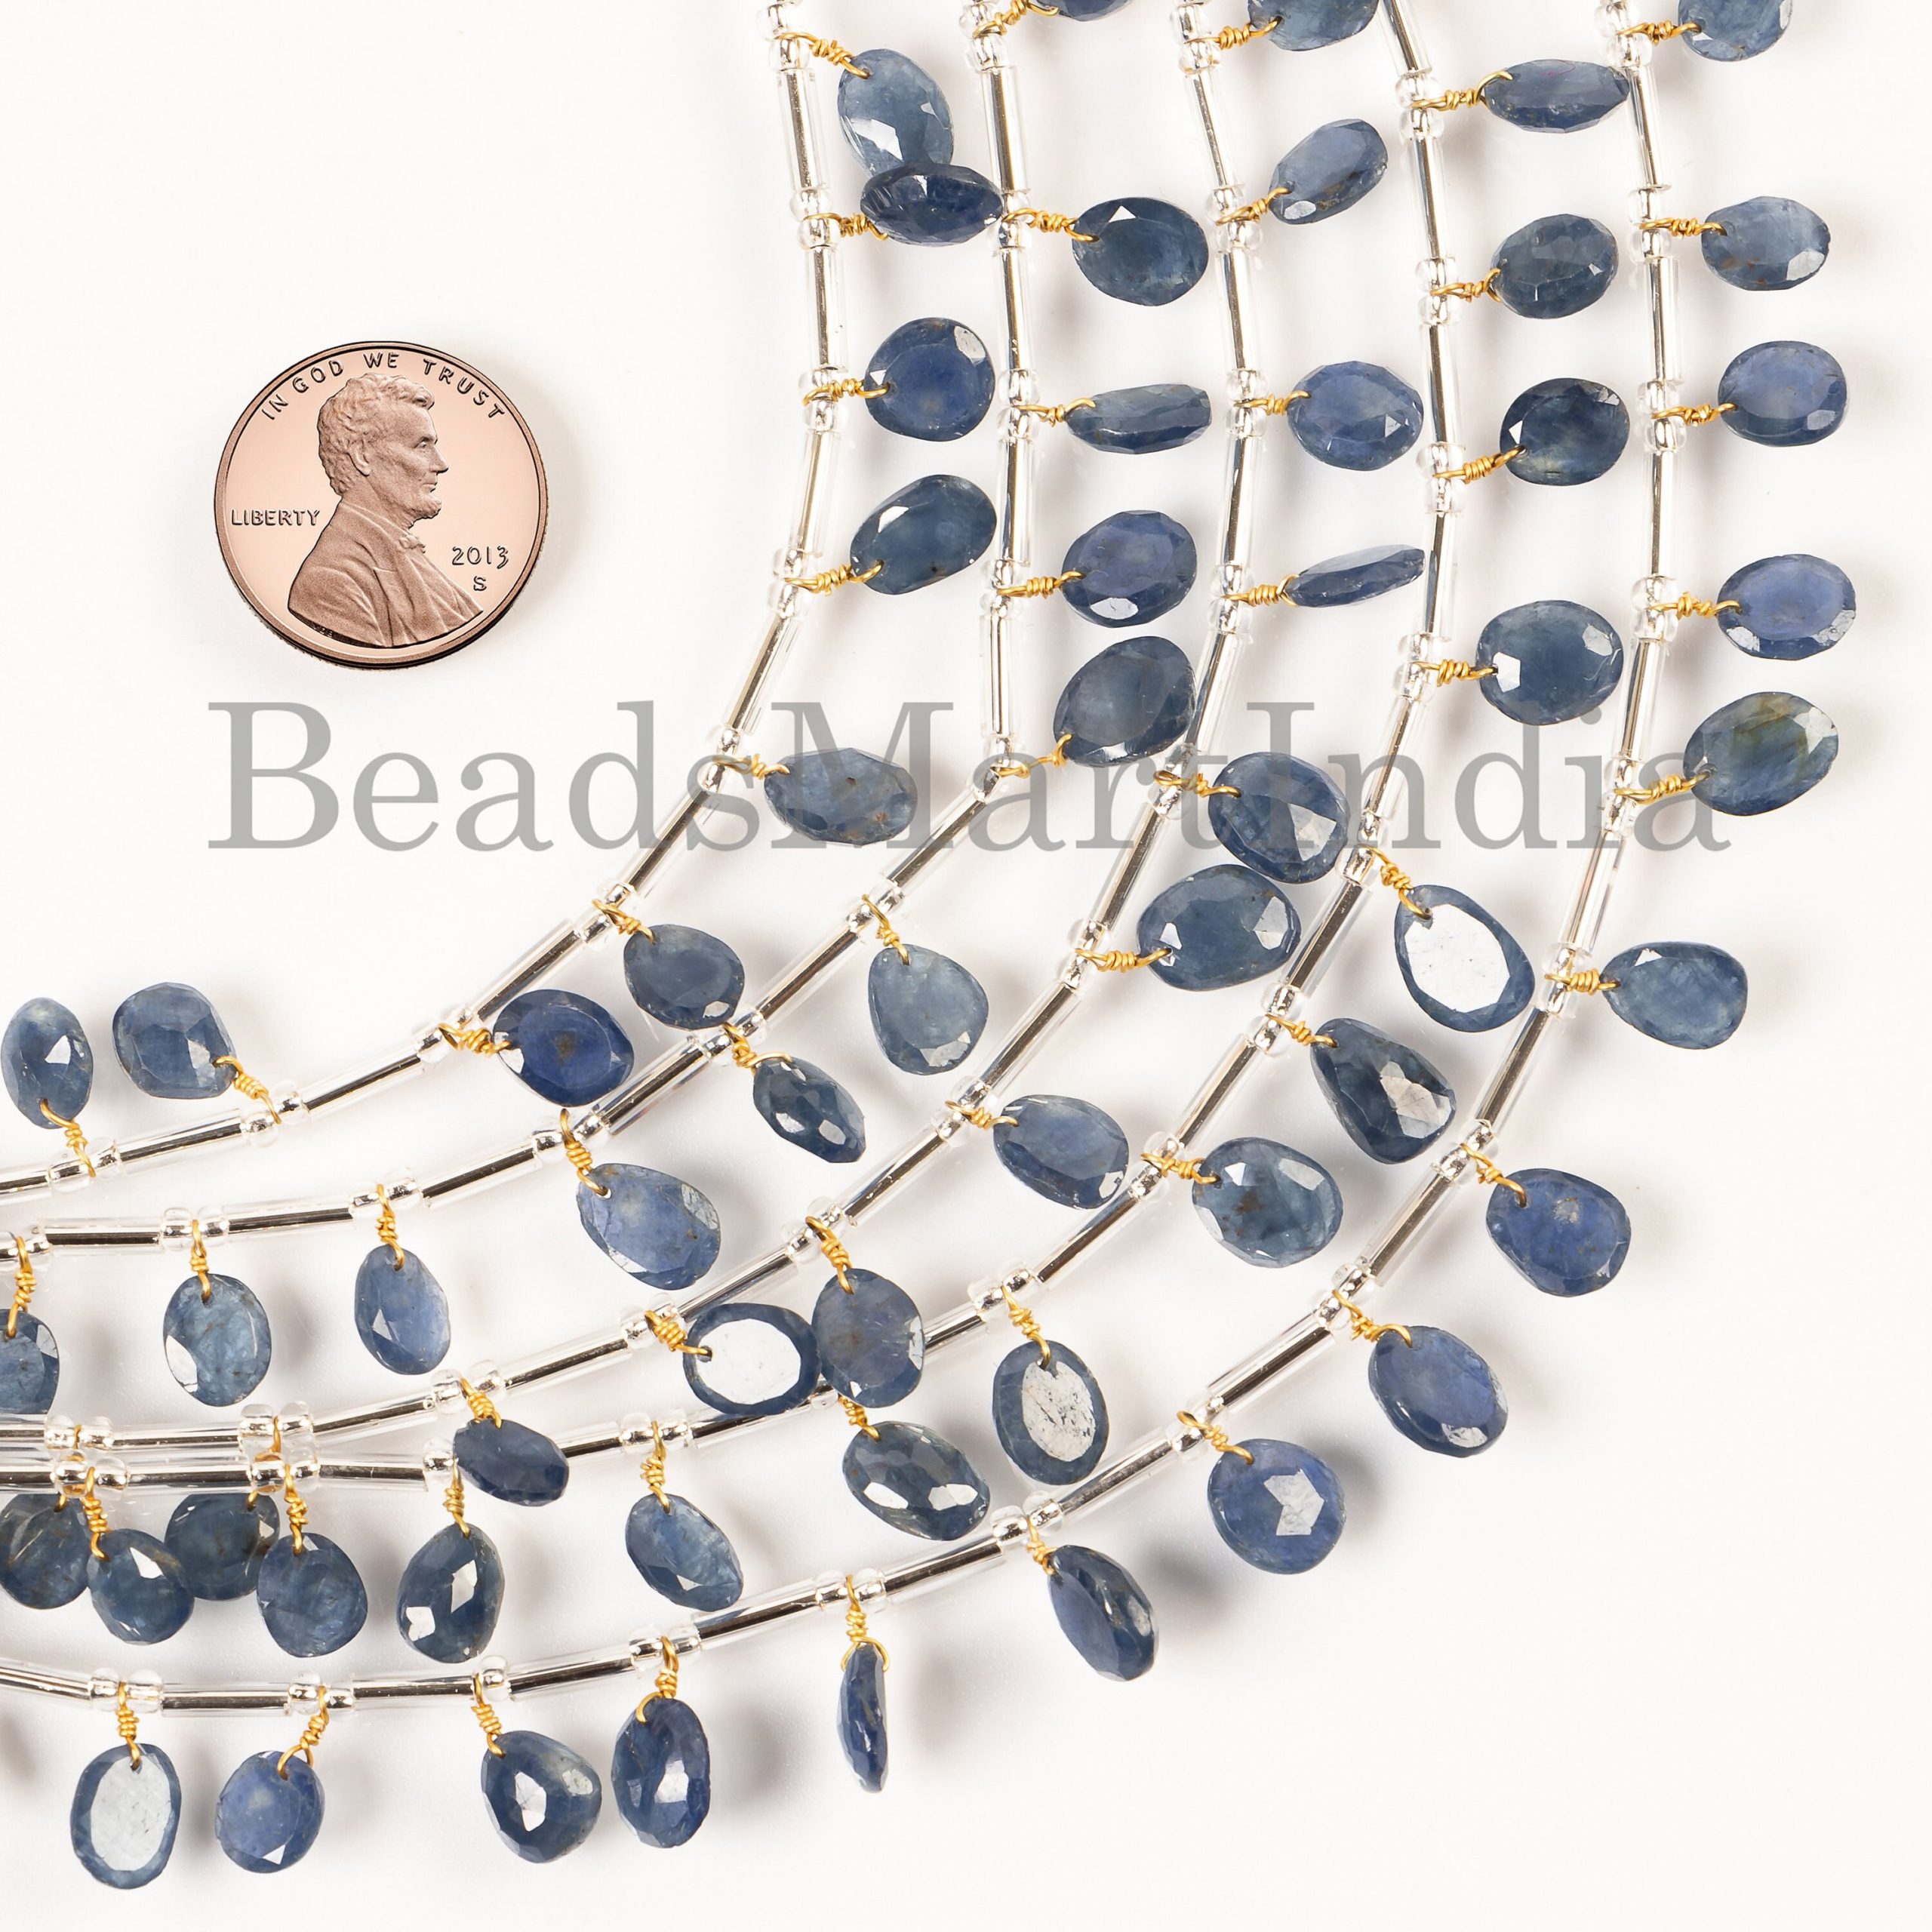 Blue Sapphire Briolette, Sapphire Rose Cut Beads, Blue Sapphire Face Drill Beads, Blue Sapphire Front To Back Beads, Sapphire Faceted Cabs